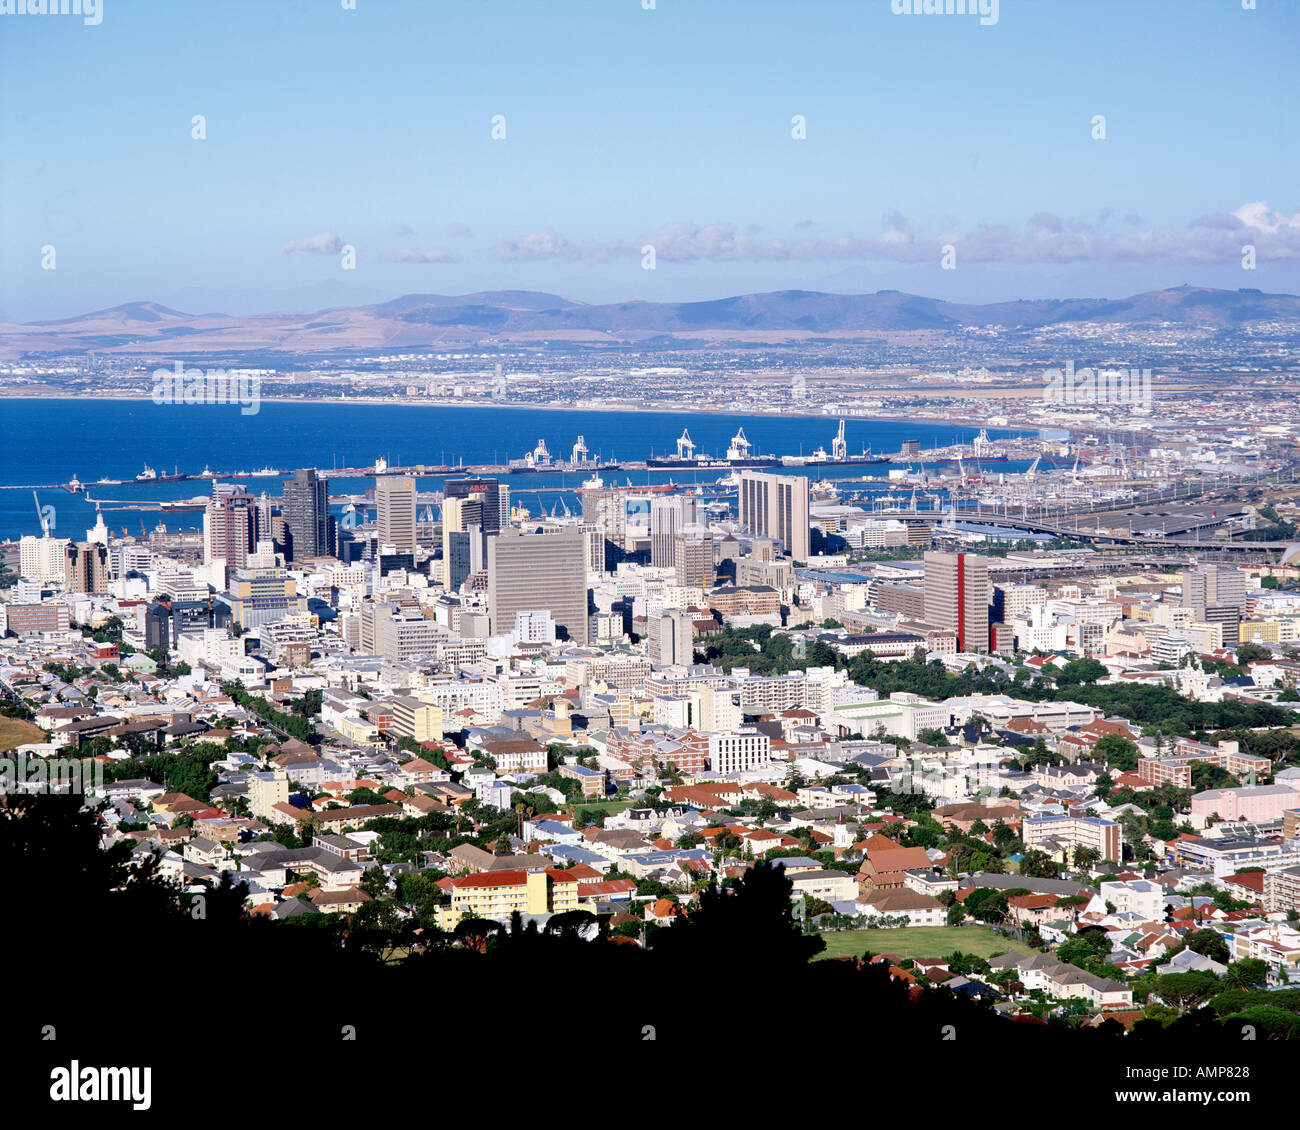 The city of Cape Town and Table Bay harbour in South Africa. Stock Photo